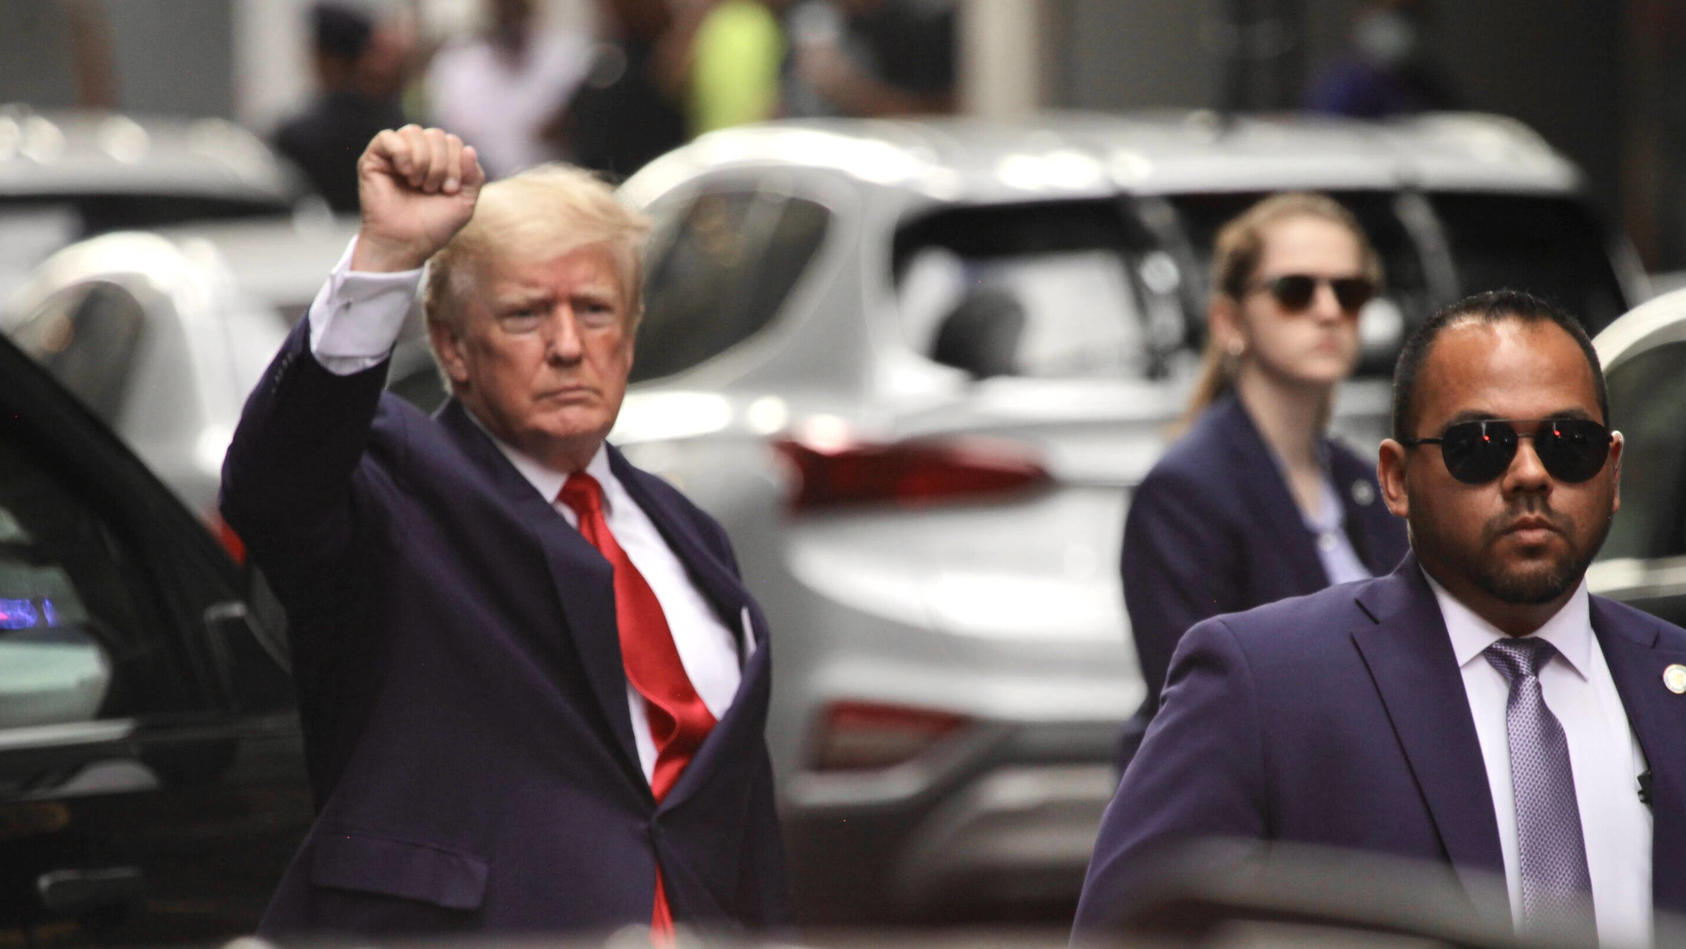 News Themen der Woche KW32 News Bilder des Tages Former President of the United States of America Donald Trump leaves Trump Tower in New York. His residence at Mar-a-Lago was raided by the FBI in the state of Florida. Where: New York, United States W